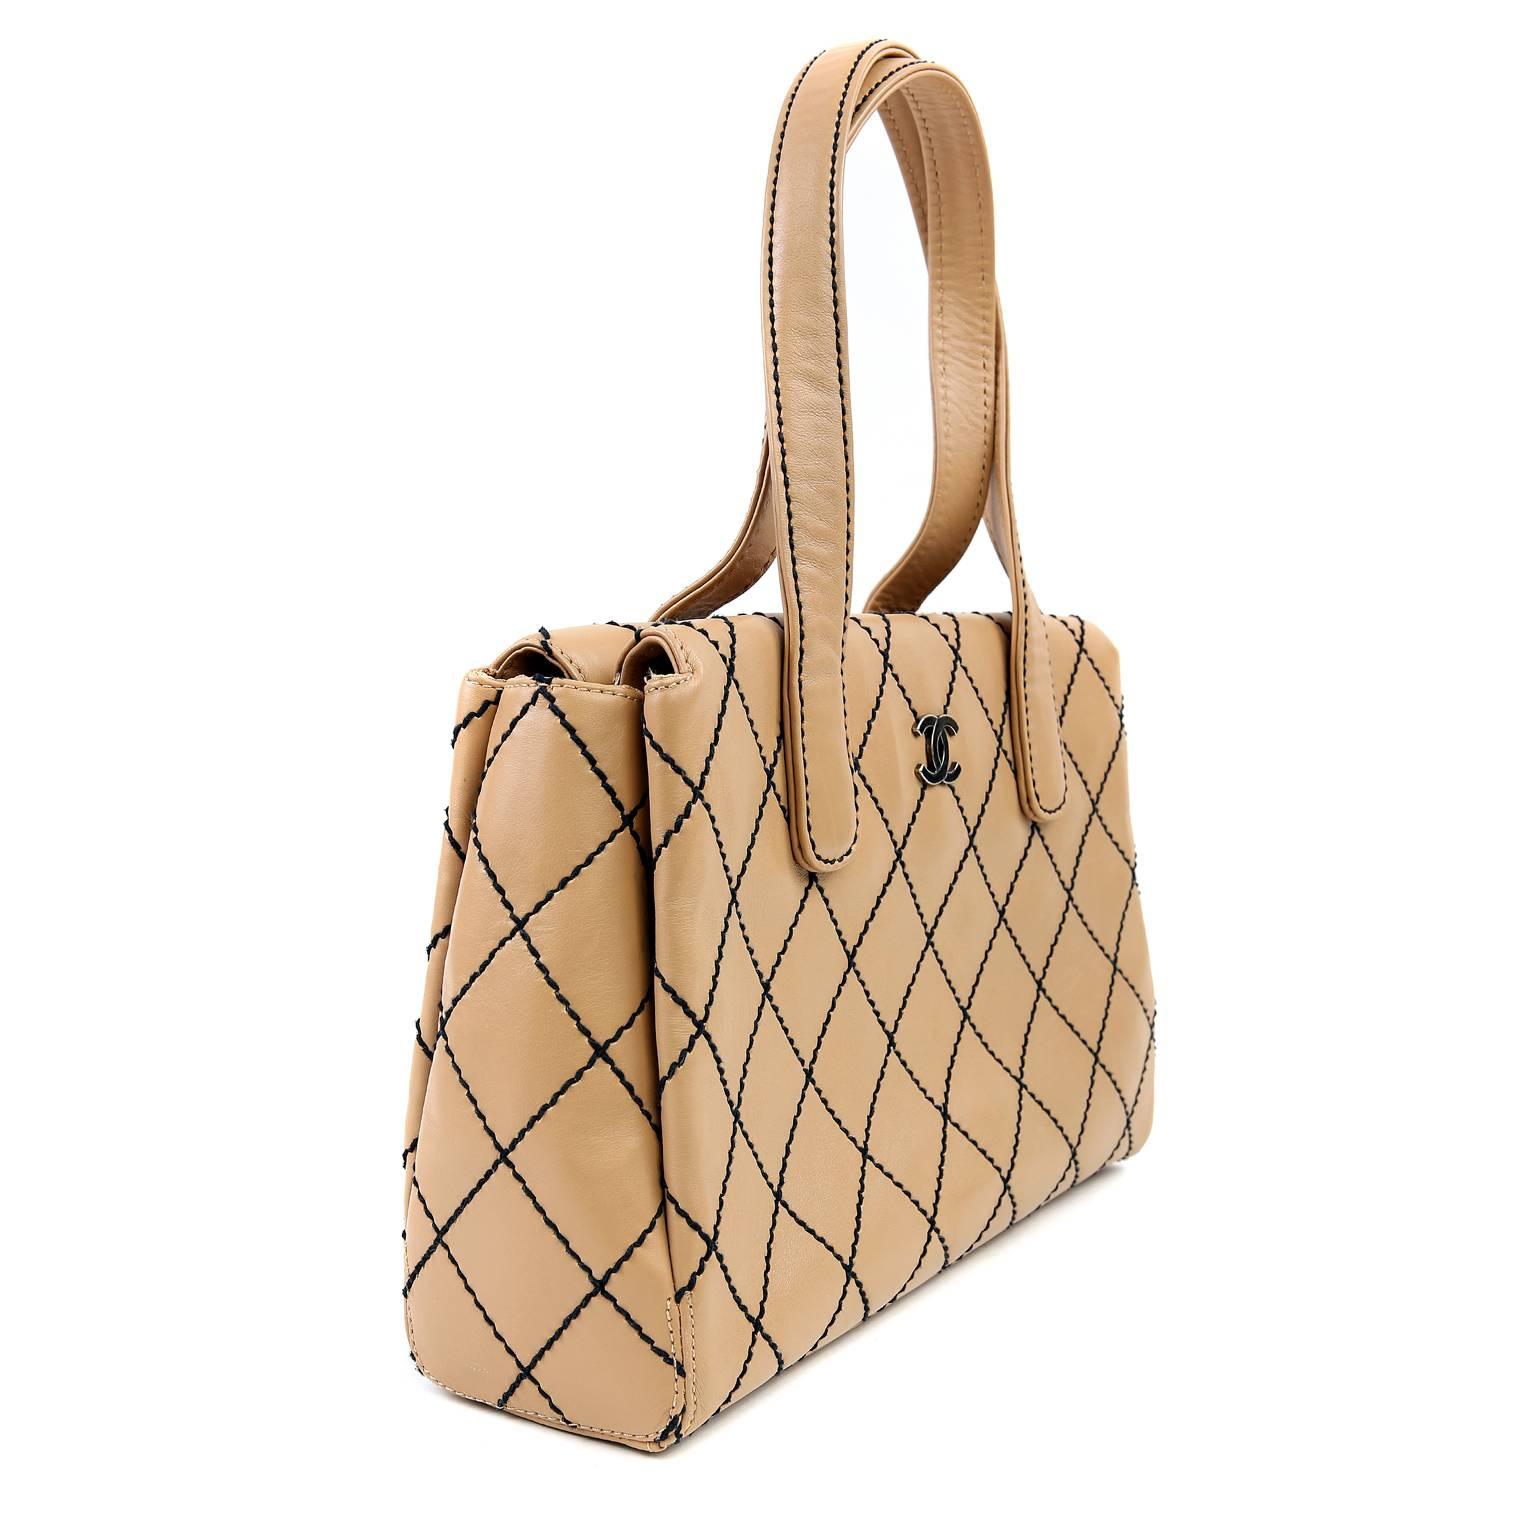 Chanel Beige Topstitched Tote- basically pristine, appearing never carried.  Smart and sophisticated, this classic piece augments any ensemble  with just the right amount of panache.
Rich beige leather is accented with contrasting black